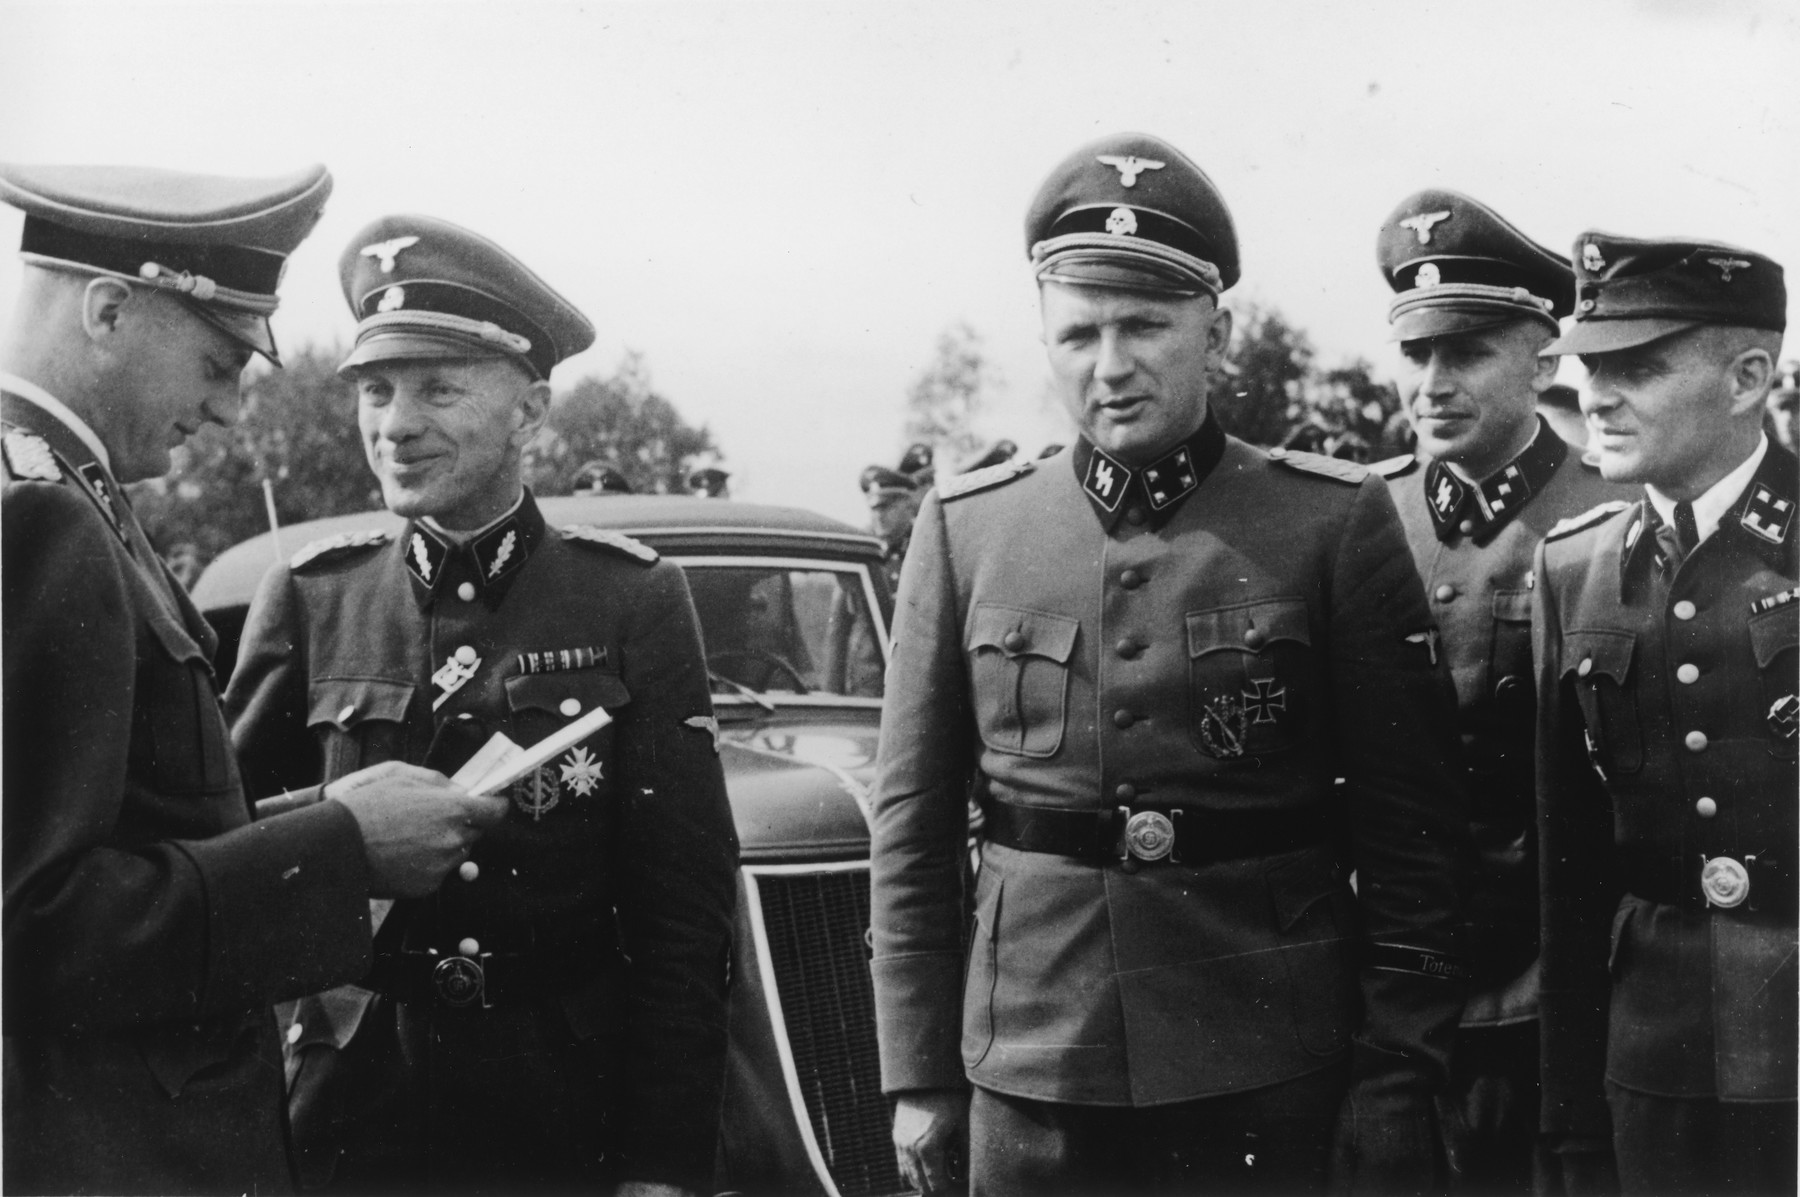 A group of SS officers gathers during the dedication of the new SS hospital.

Pictured left to right are Dr. Eduard Wirths, Dr. Enno Lolling, Commandant Richard Baer, Adjutant Karl Hoecker and former Commandant Rudolf Hoess. 

Dr. Wirths also received his promotion to Sturmbannfuehrer and decorated with the War Service Cross 1st Class at the same time and this might be what is being portrayed here.